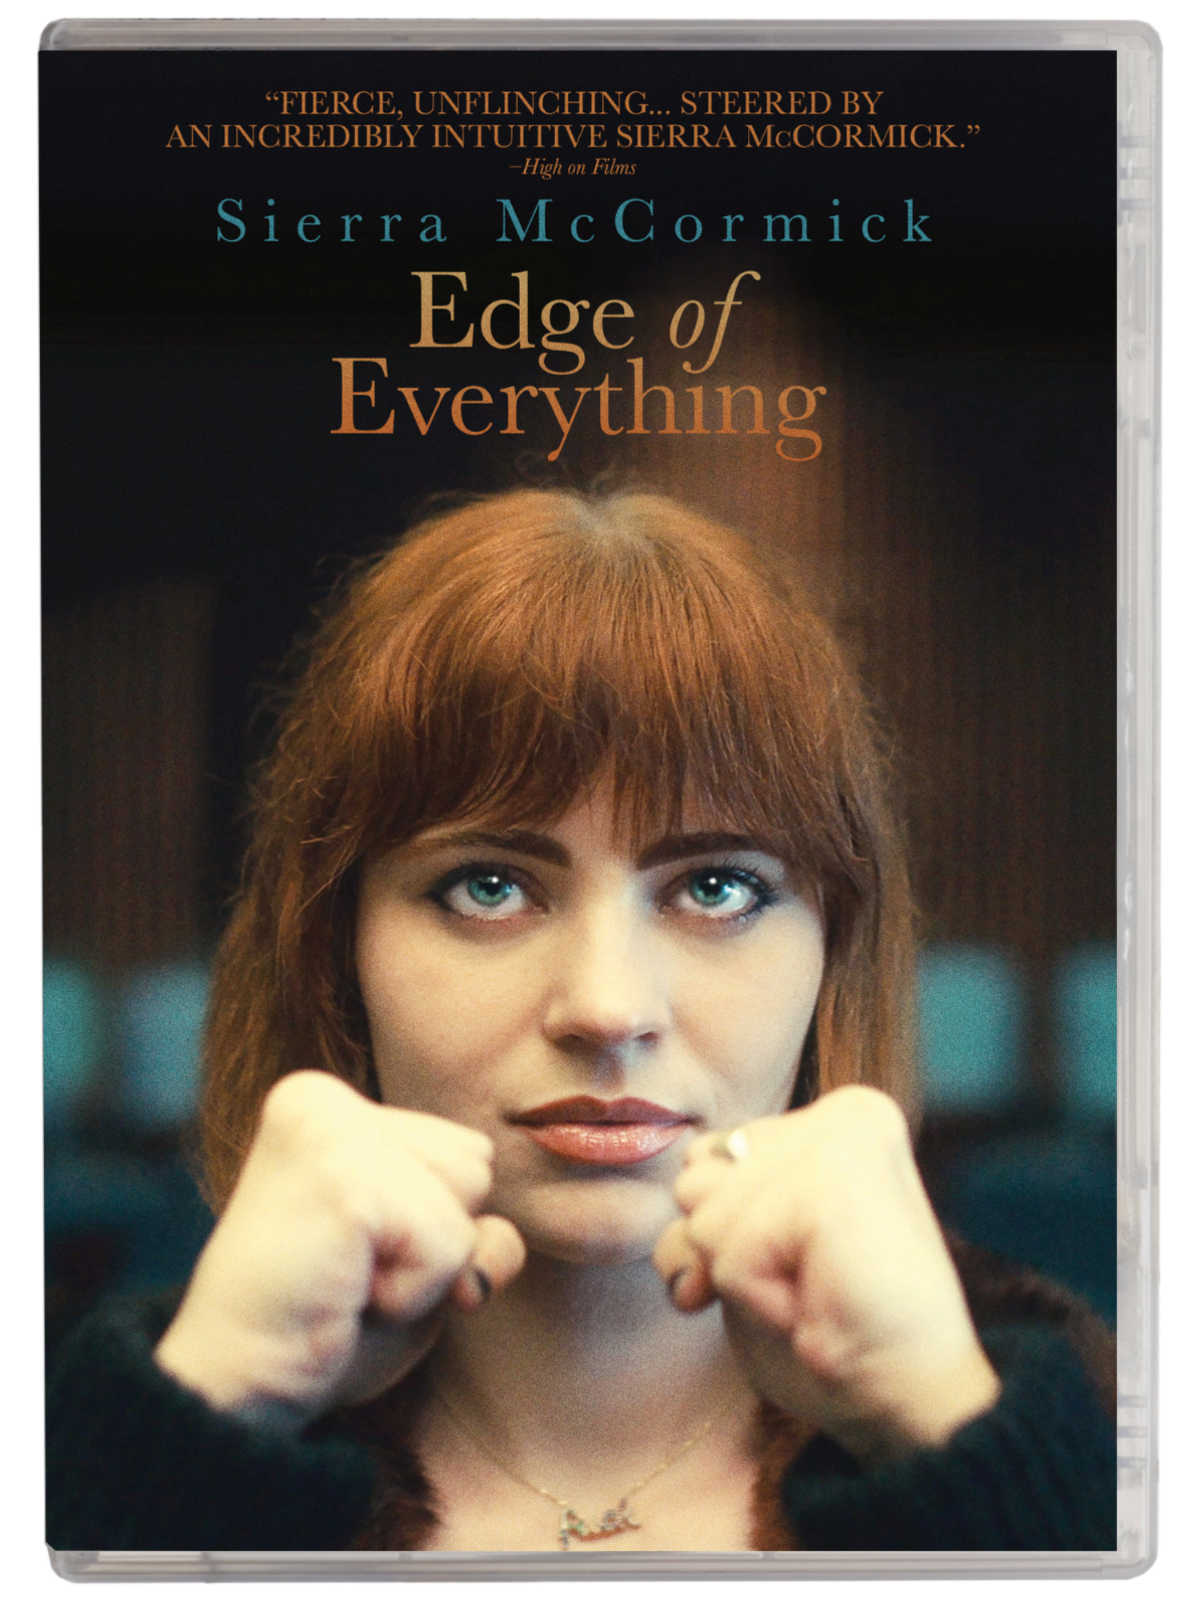 Edge of Everything, a powerful coming-of-age story, follows Abby, a teenager grappling with loss and forging her path in a new reality. Excellent performances and a thoughtful exploration of grief make this a must-have DVD.